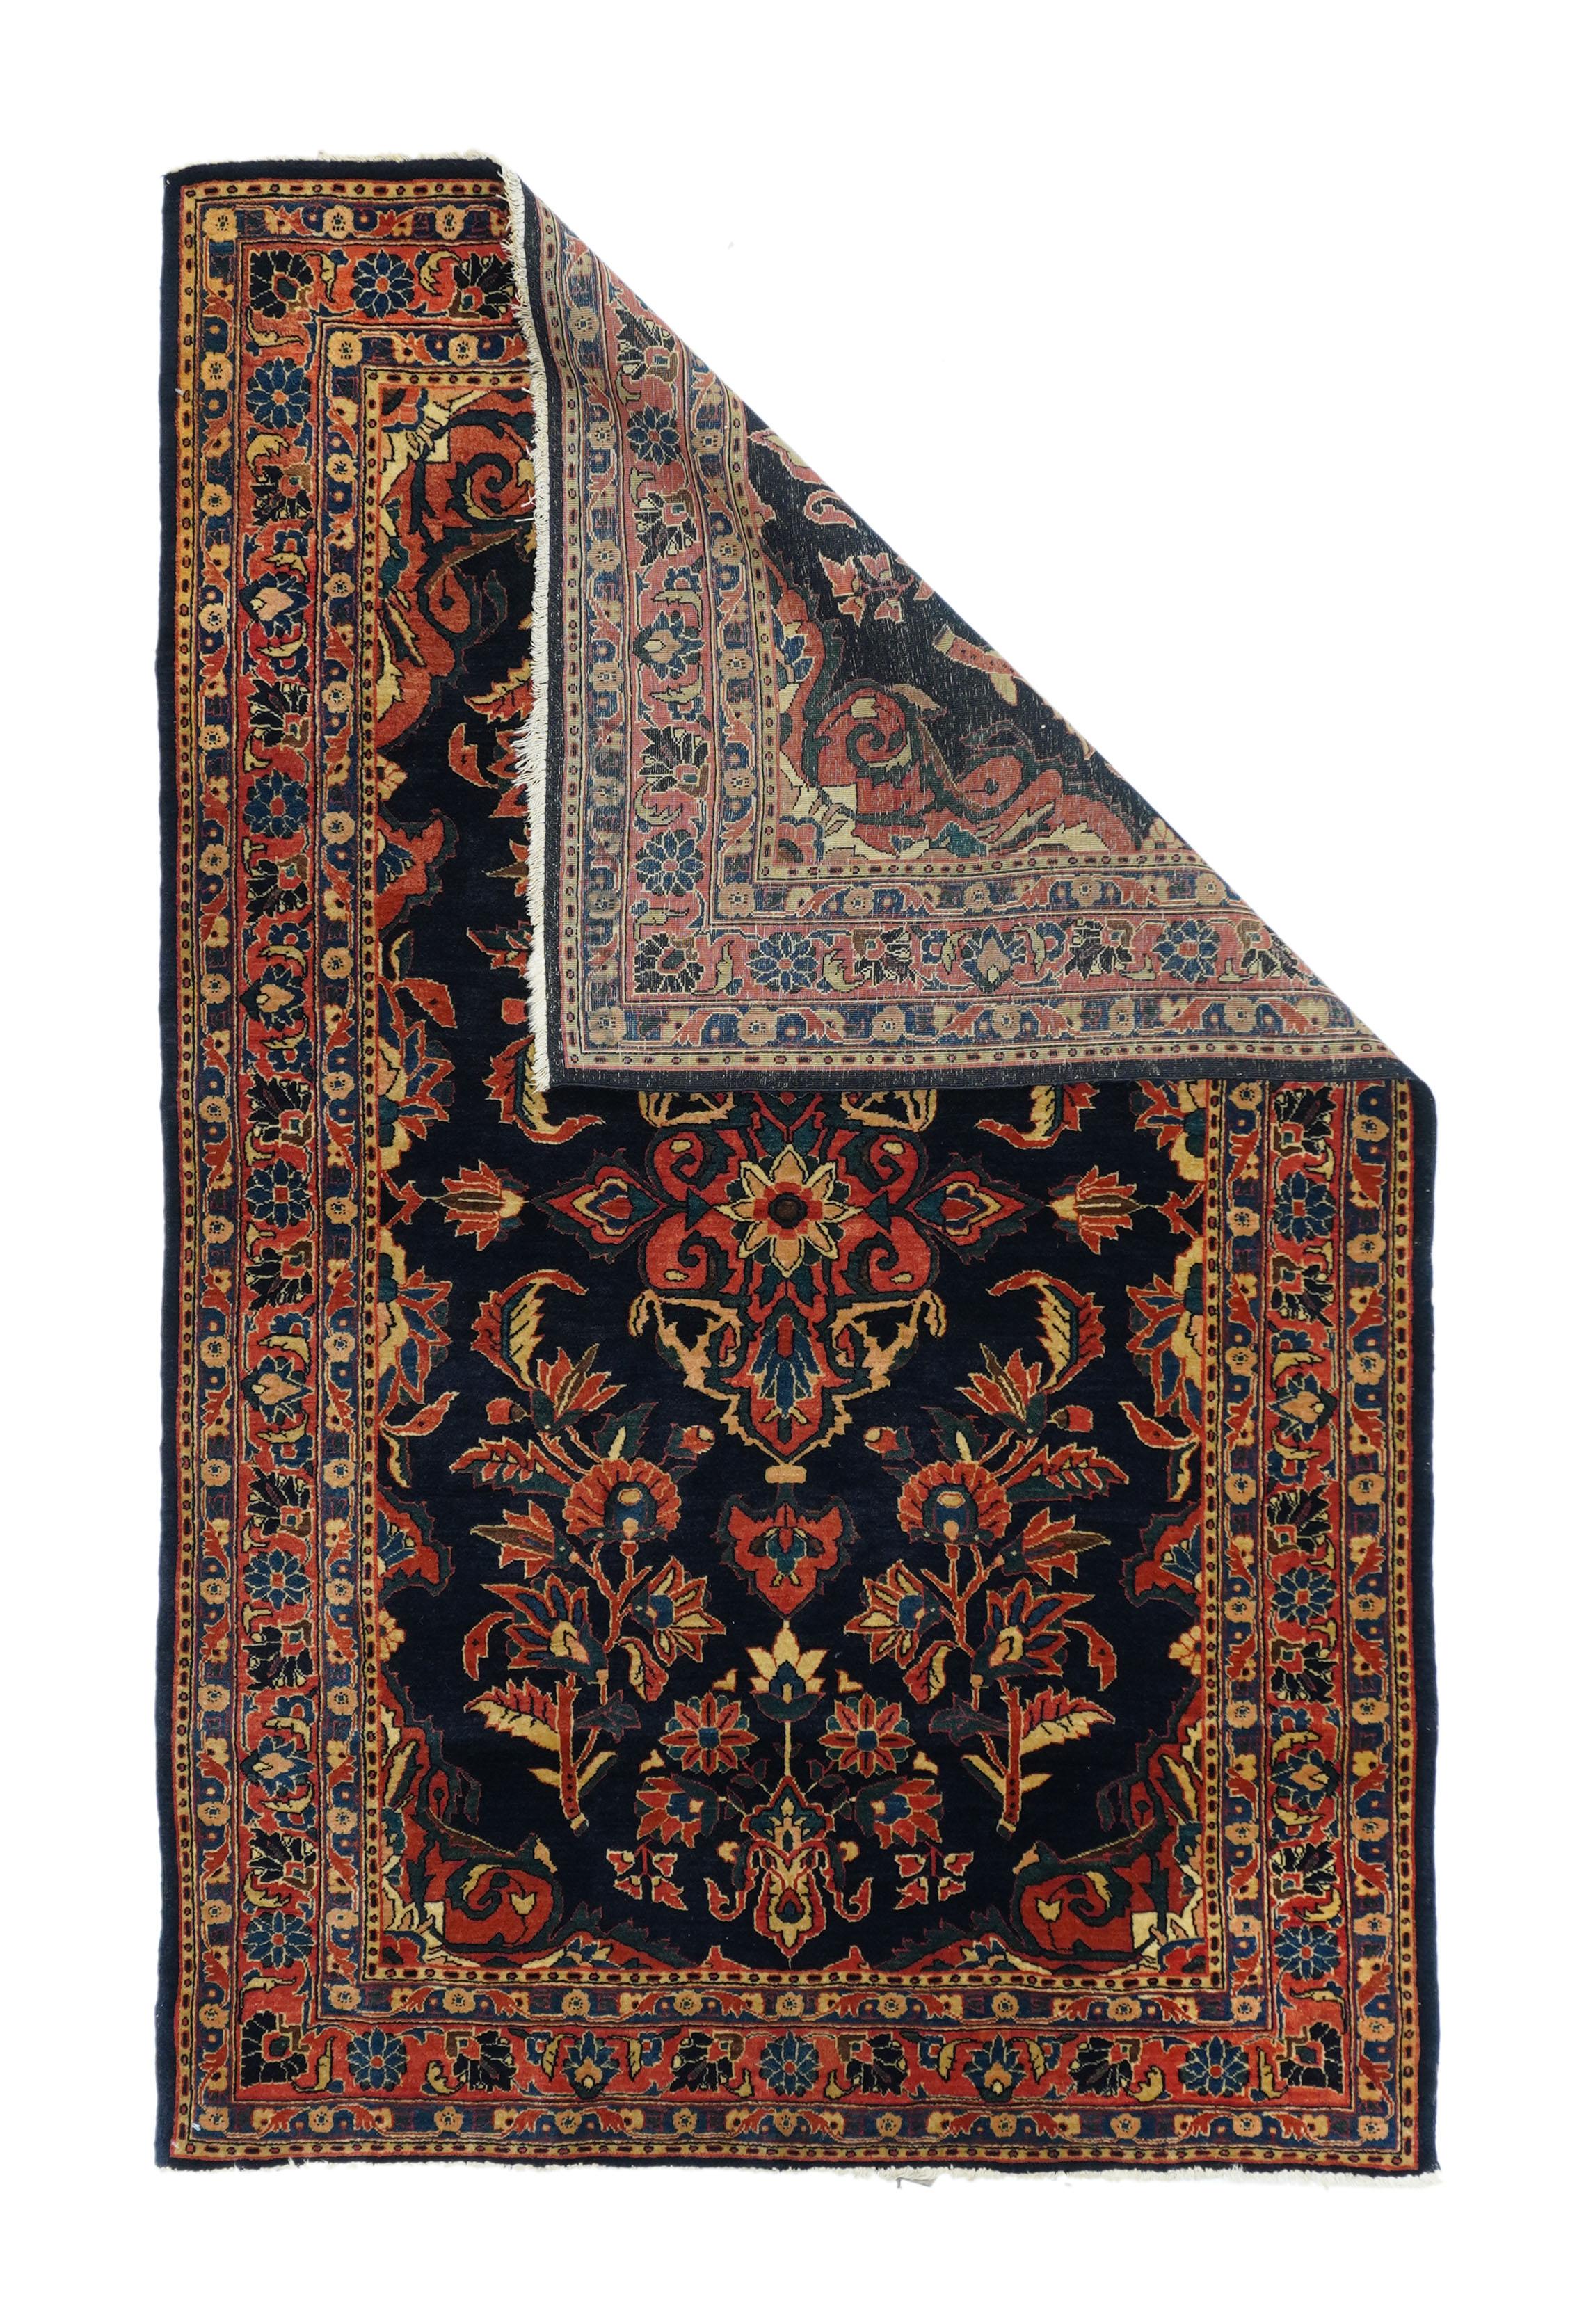 Antique Sarouk rug 4'4'' x 6'6''. Well-woven, dark blue ground interwar Sarouks are often attributed to Mohajeran village, This scatter shows a navy field with large carnation sprays, barbed leaves and a small central petal octogramme. Narrow red